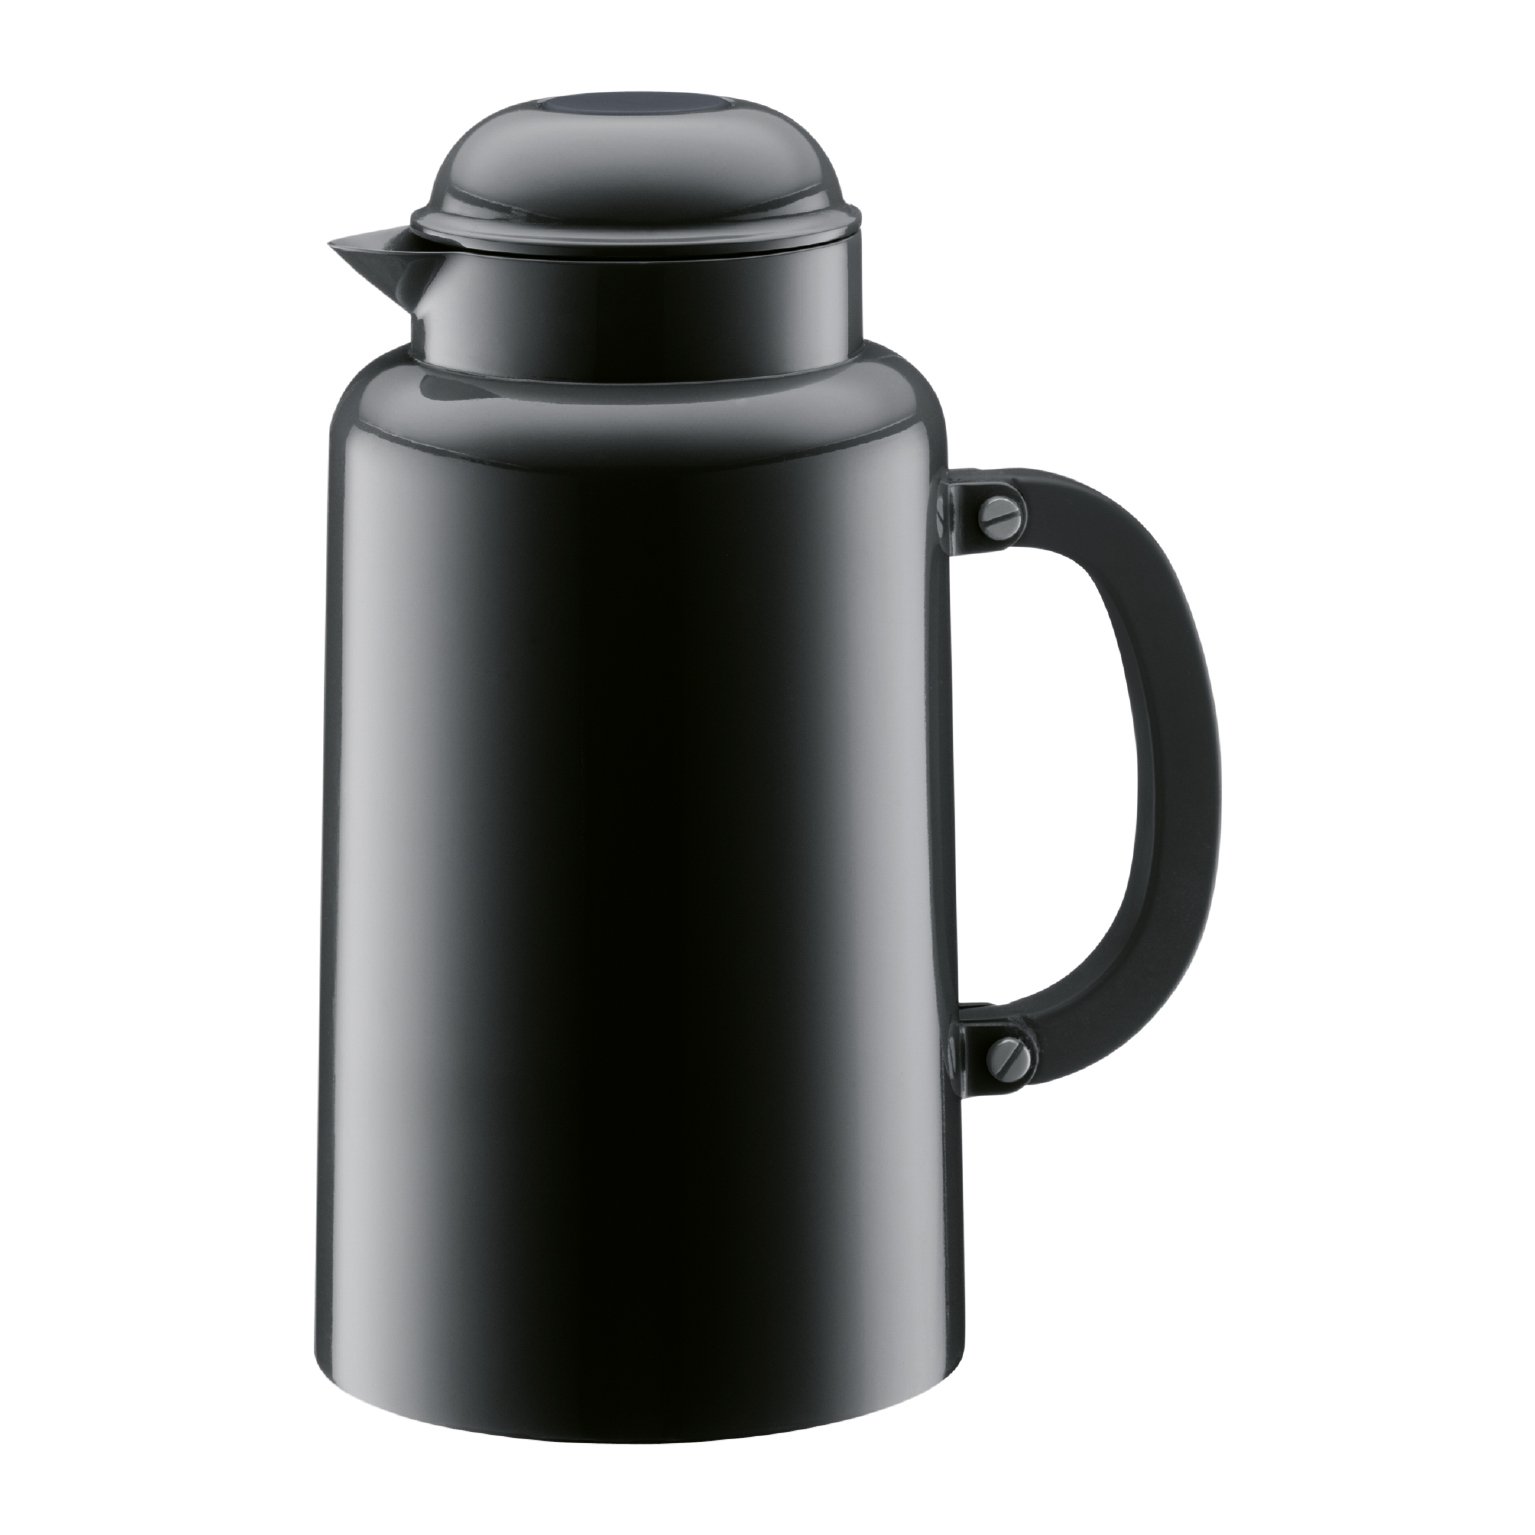 Bodum Bistro Thermo Jug: What's Brewing #35 